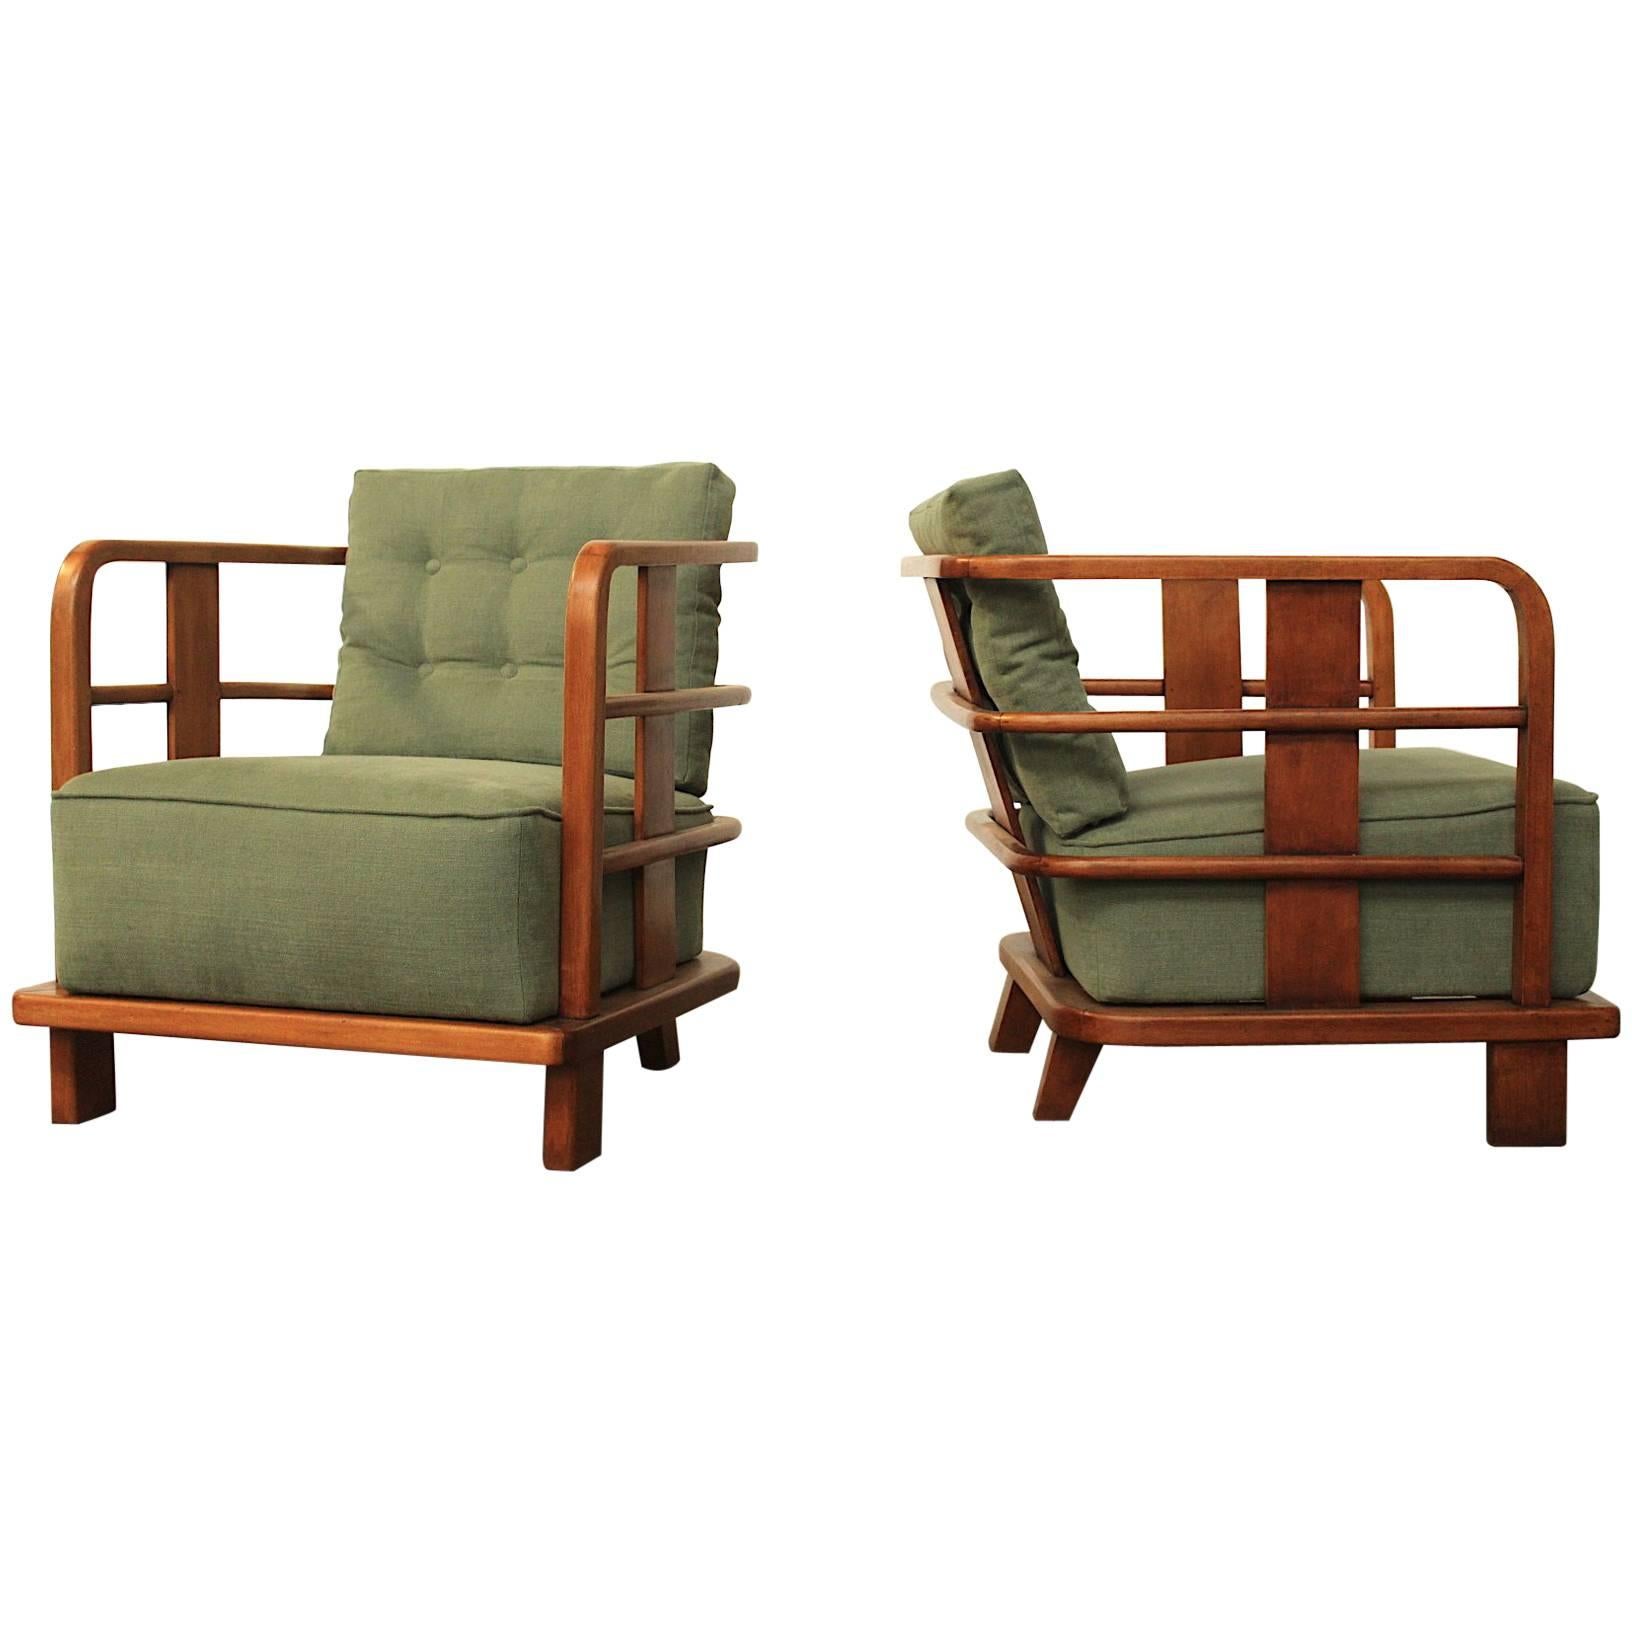 Pair of Arm Chairs Easy Chairs, attributed to Jean Royere, France mid 1940's